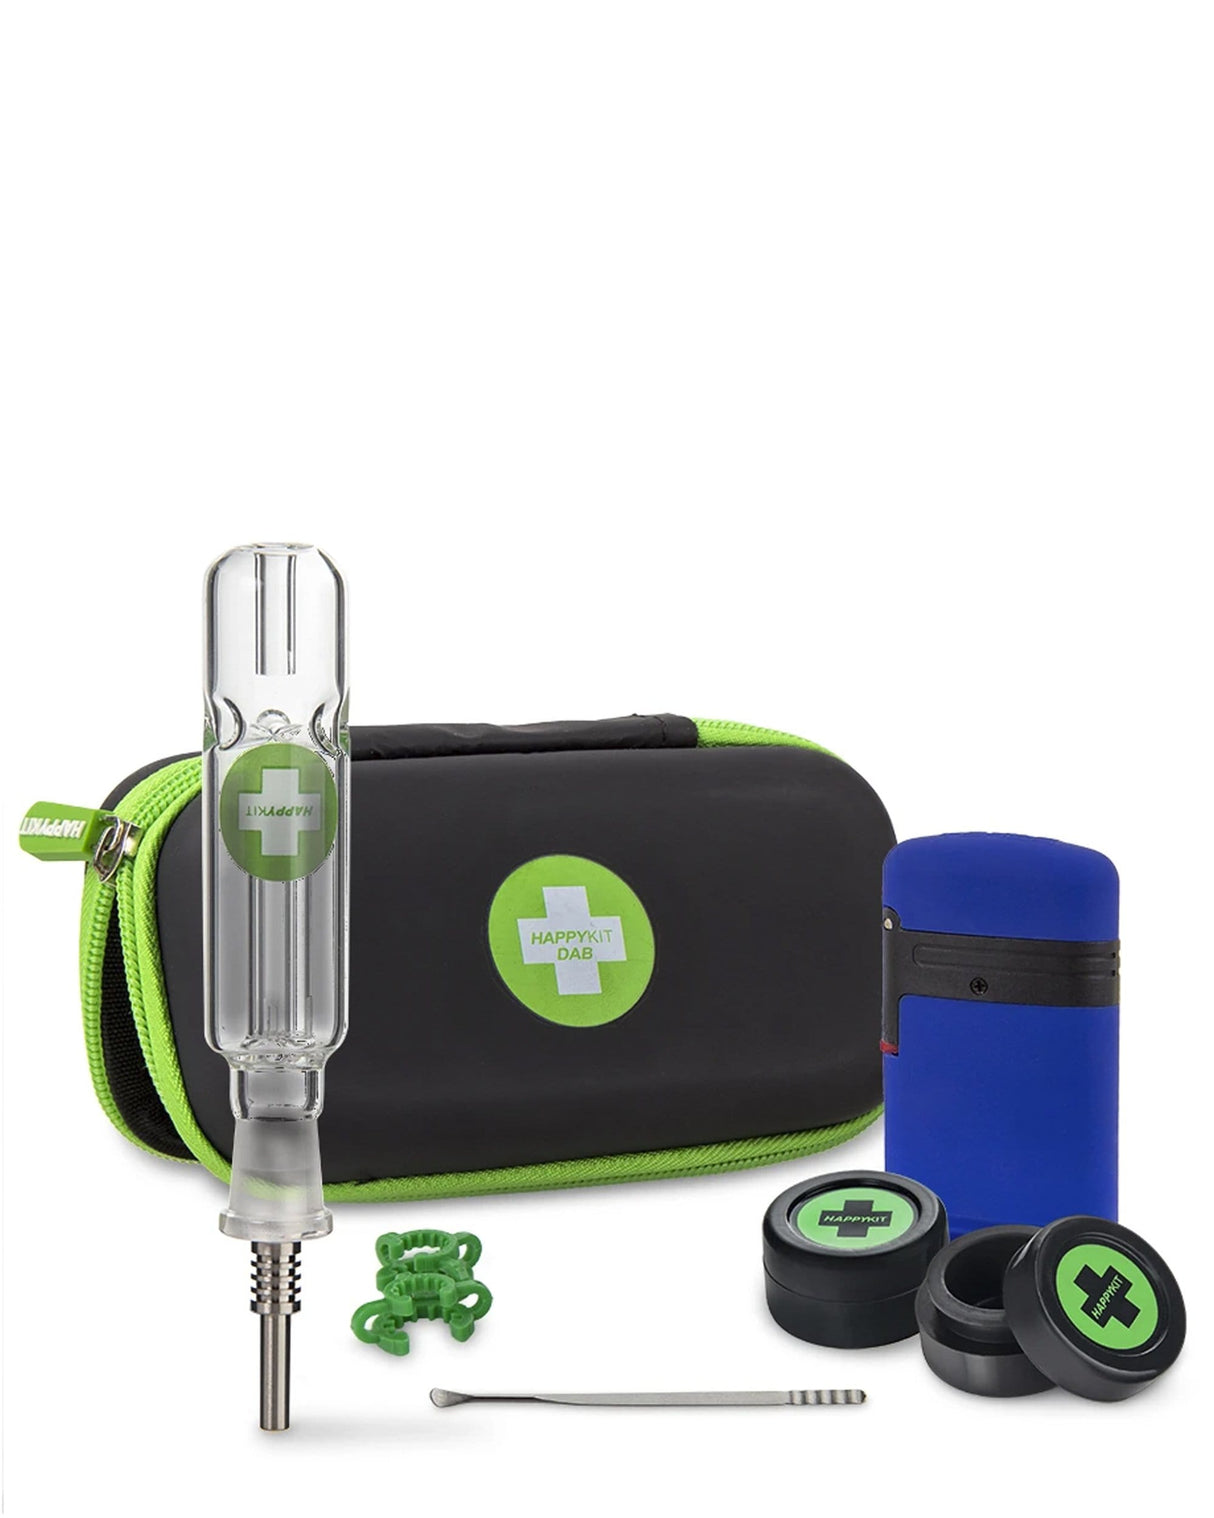 The Happy Dab Kit by Happy Kit in Black with glass dab rig, torch, containers, and poker